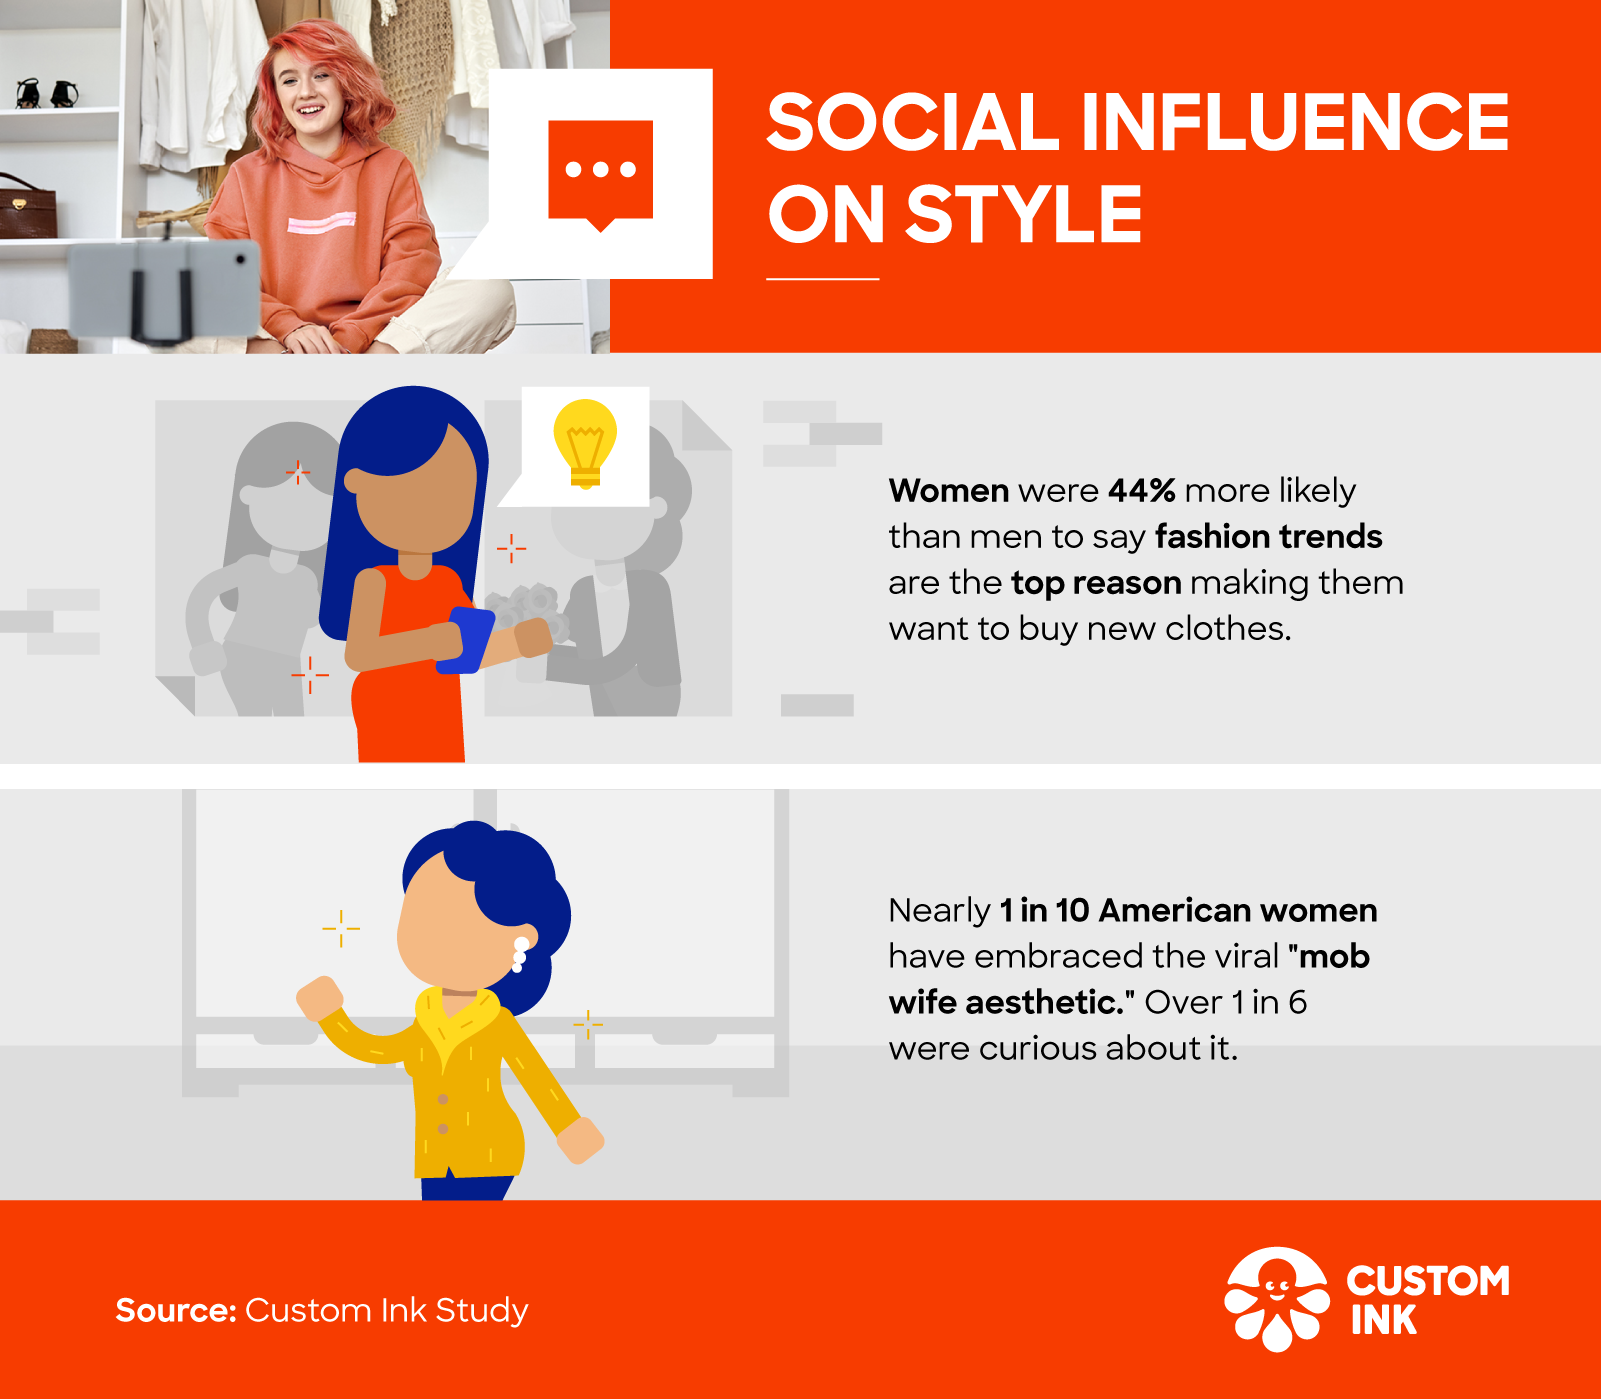 Exploring how social media impacts style